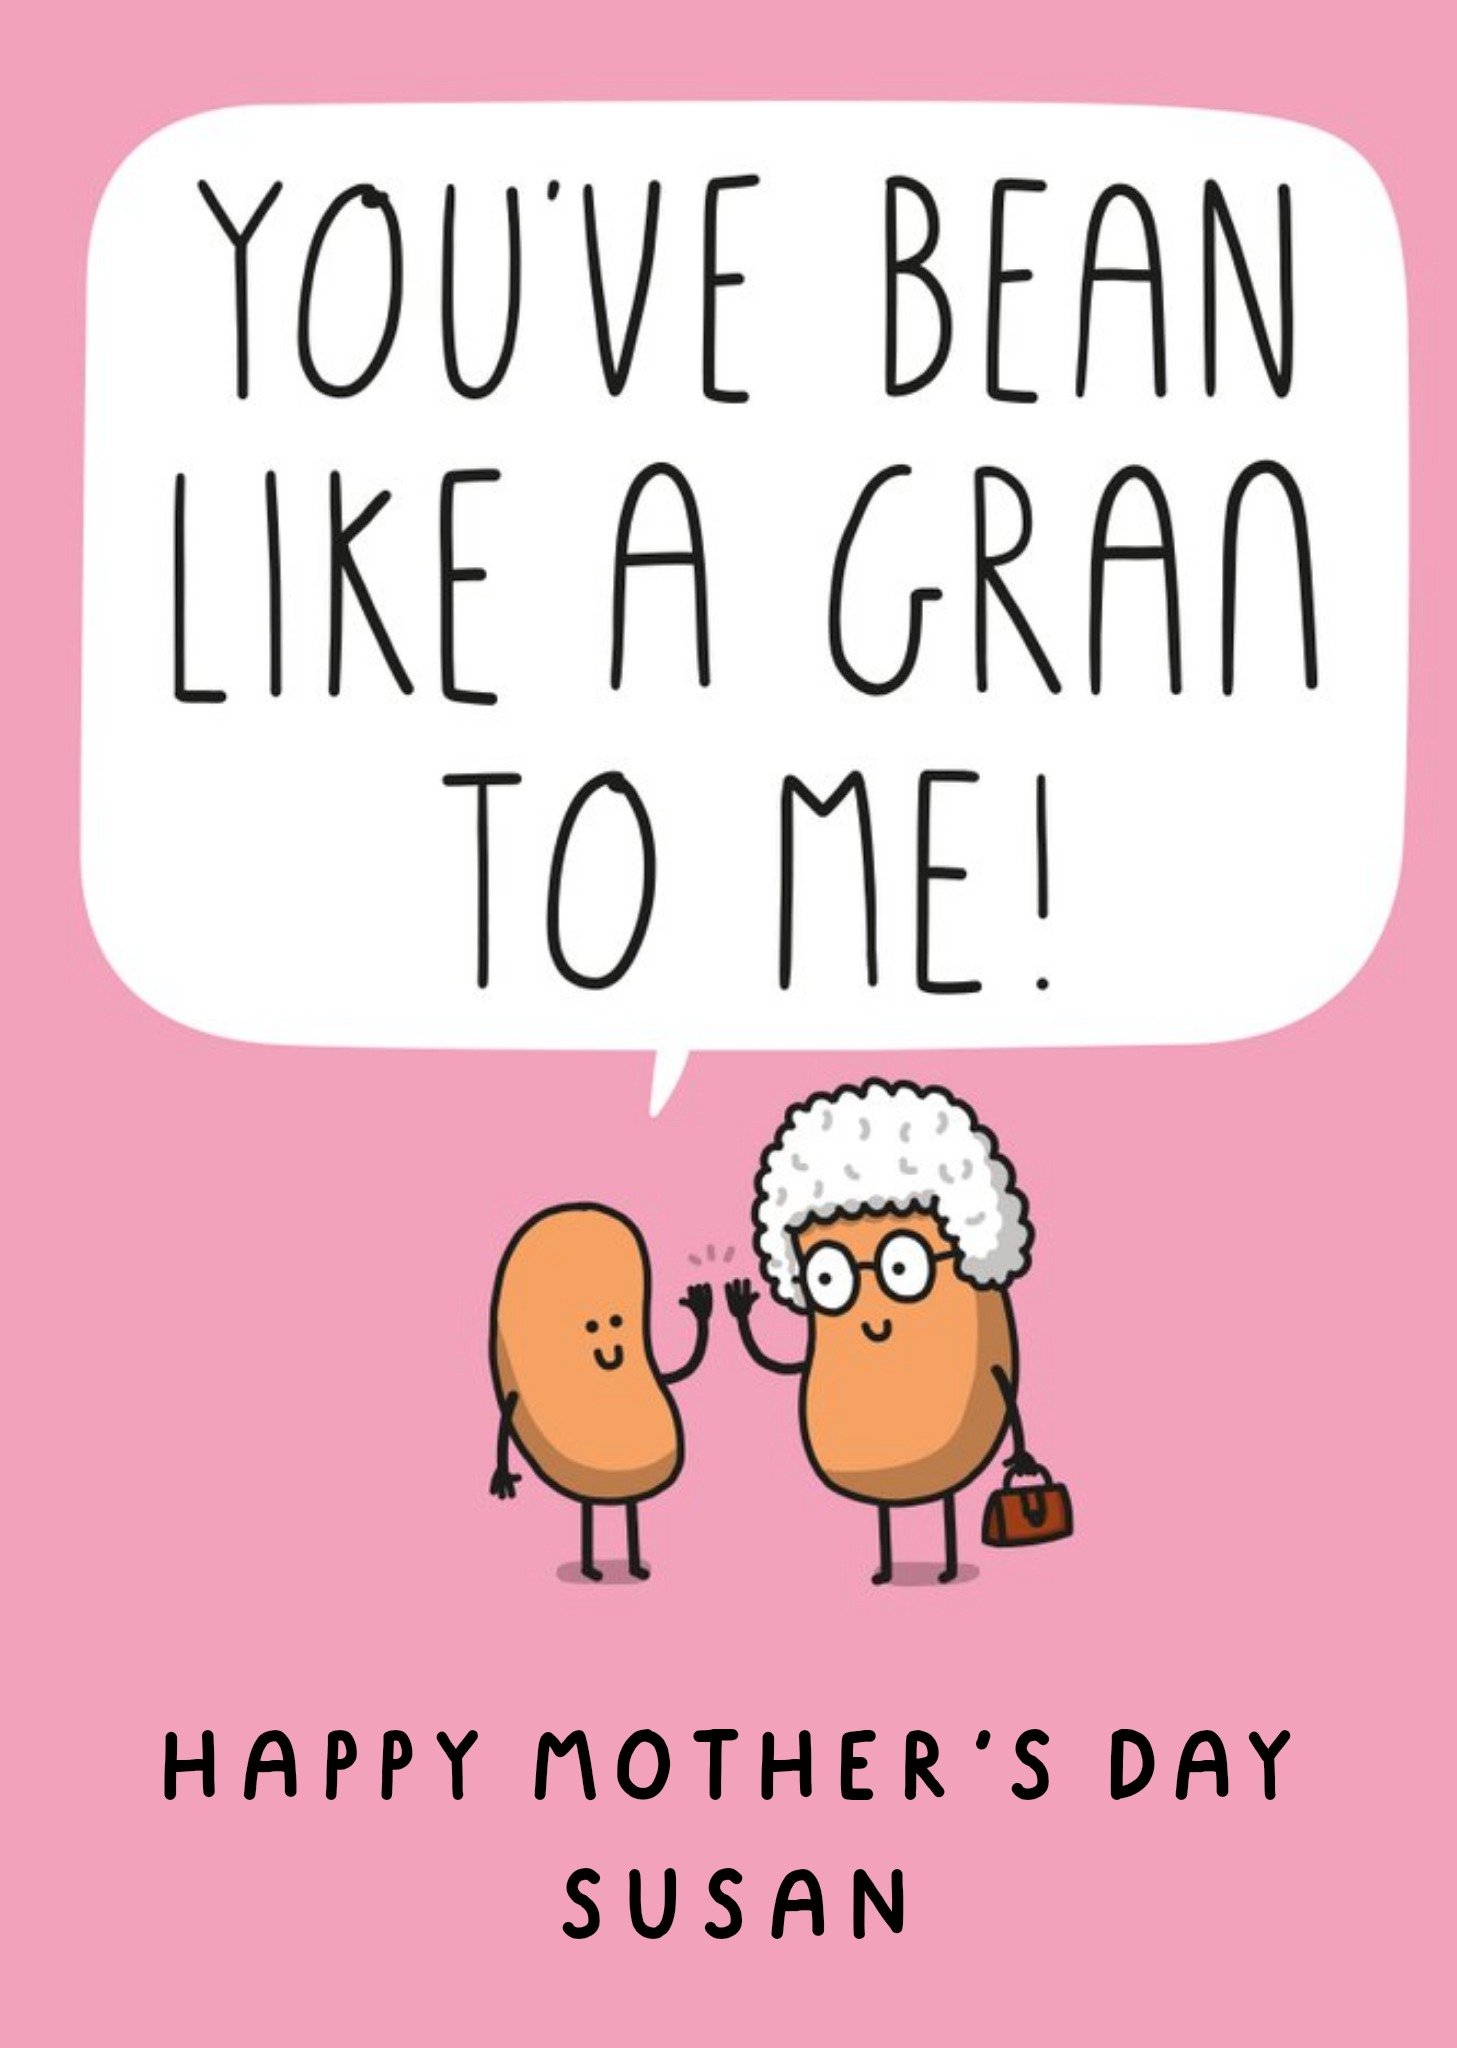 Friends Illustration Of Two Bean Characters Funny Pun Mother's Day Card Ecard